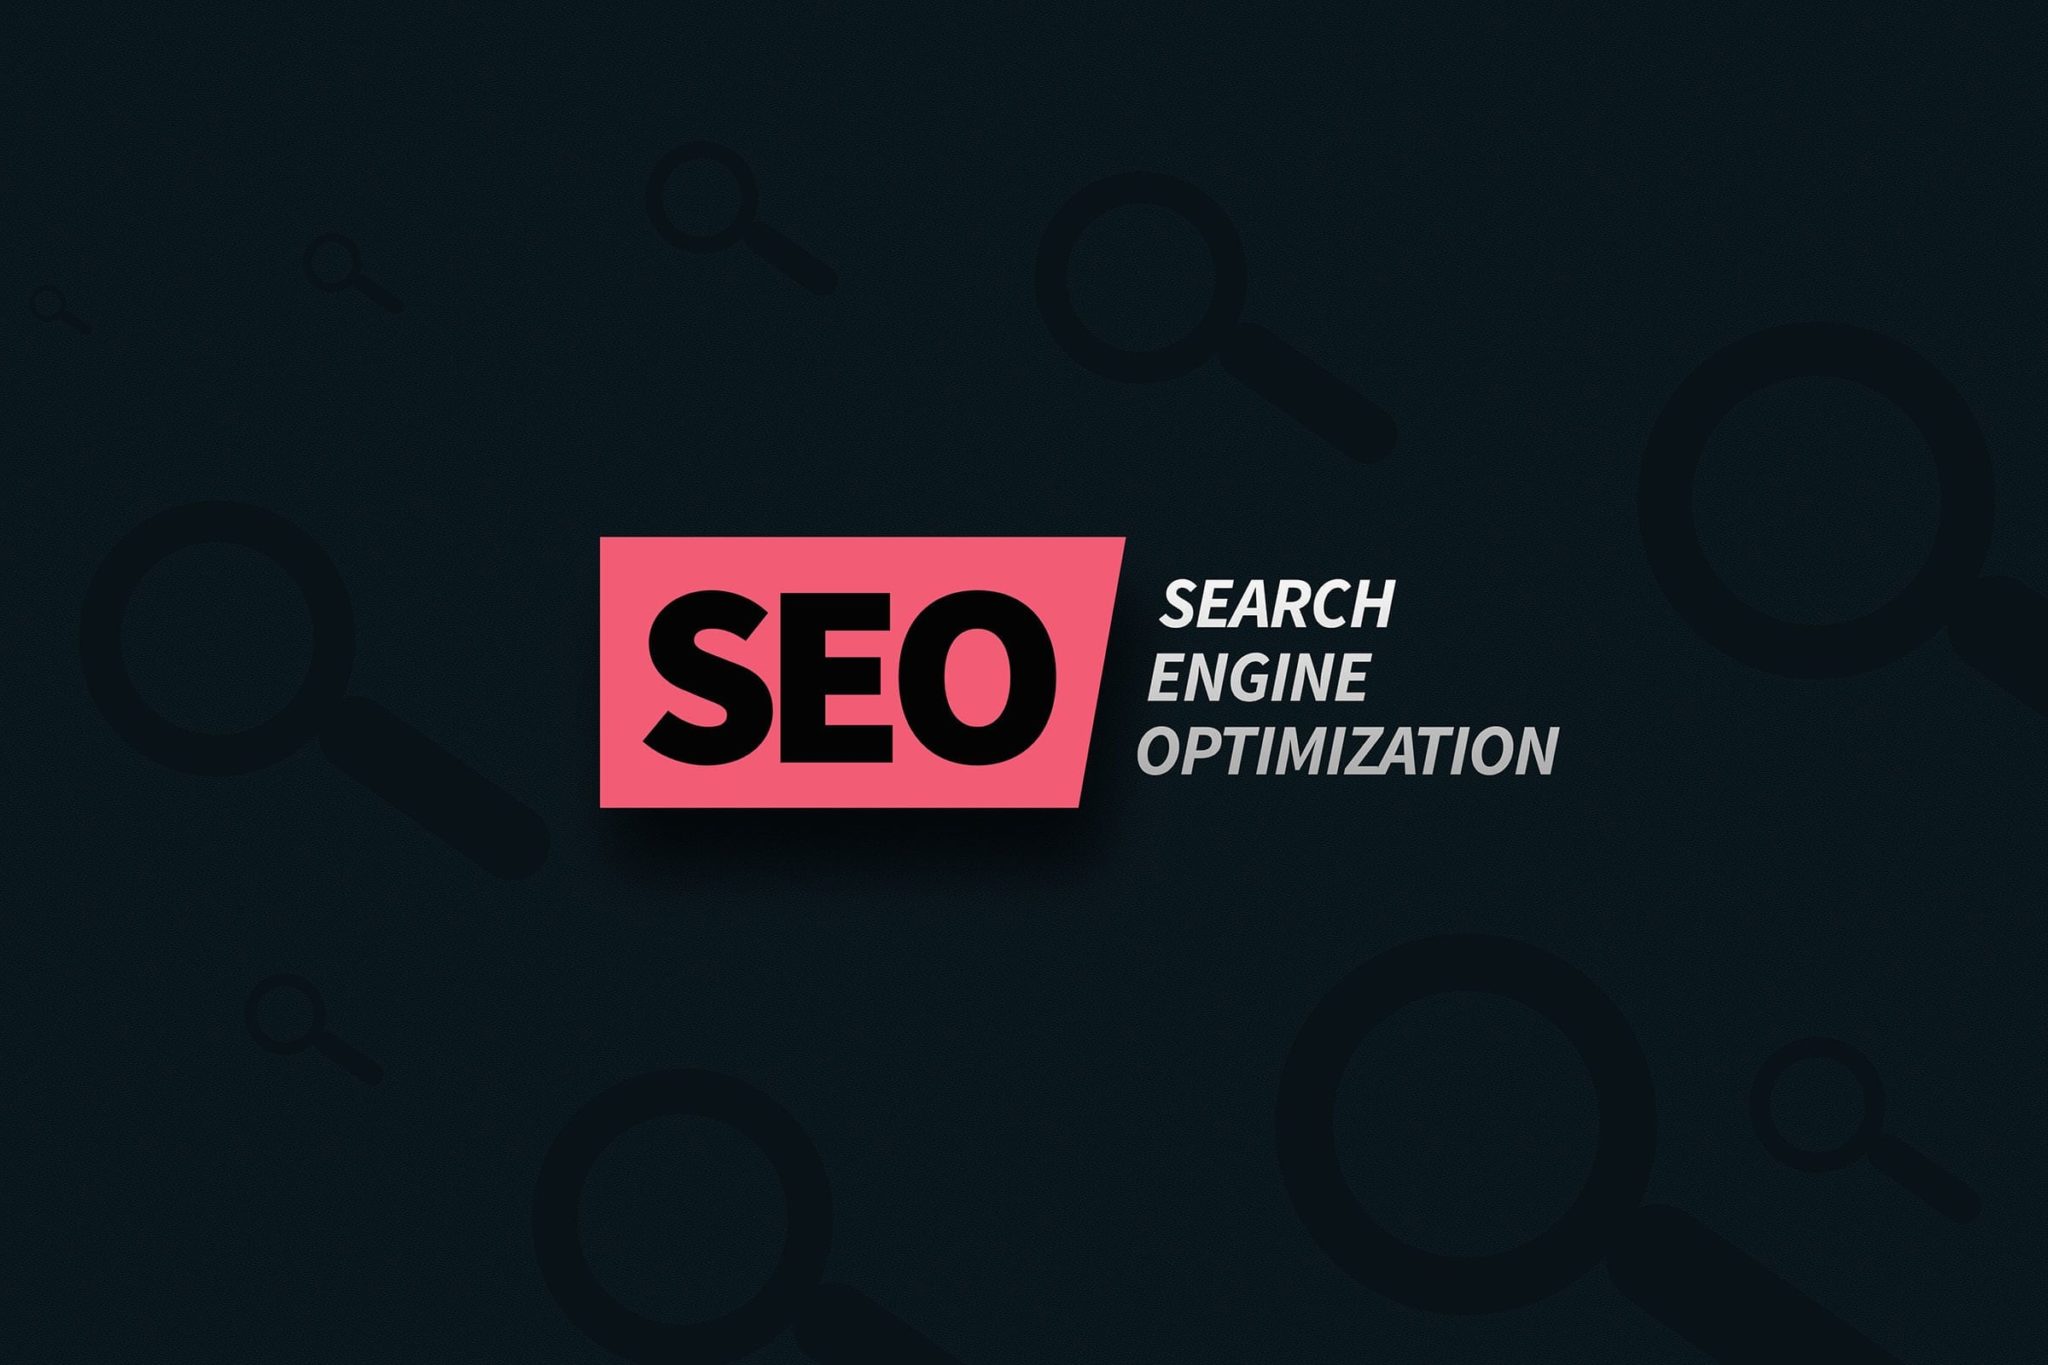 Using Structured Data for Search Engine Optimization